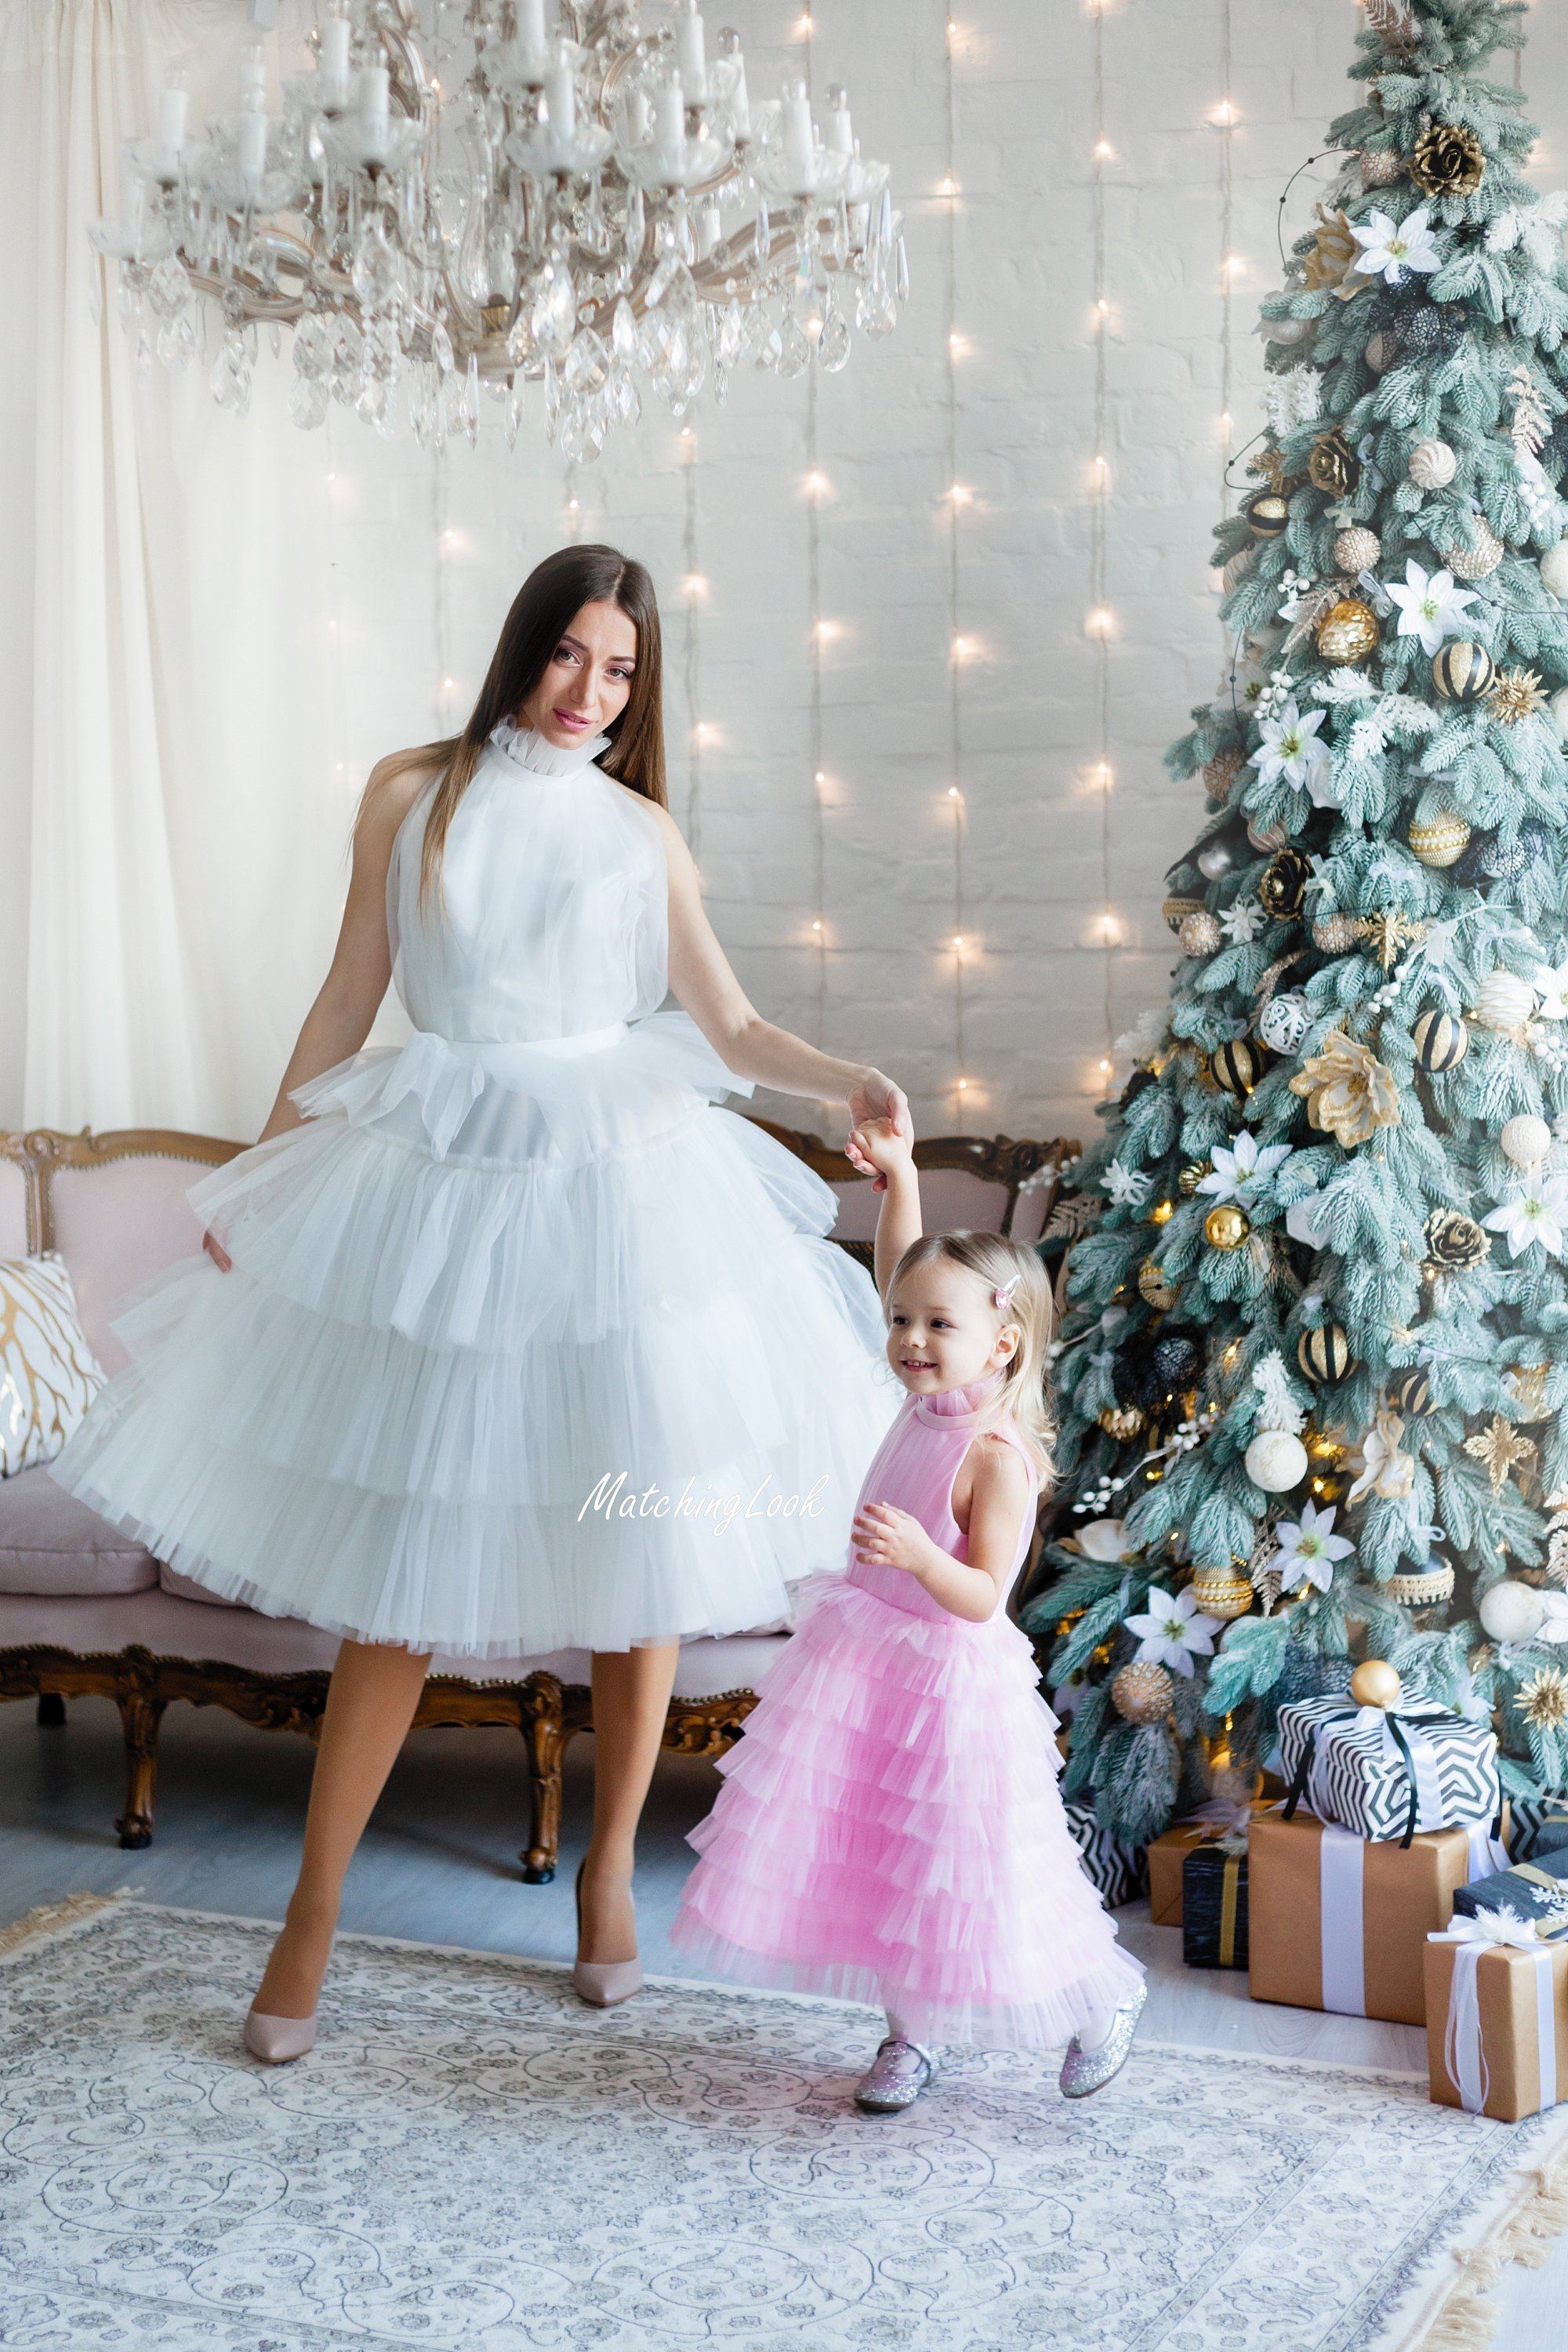 matching white dresses for mother and daughter